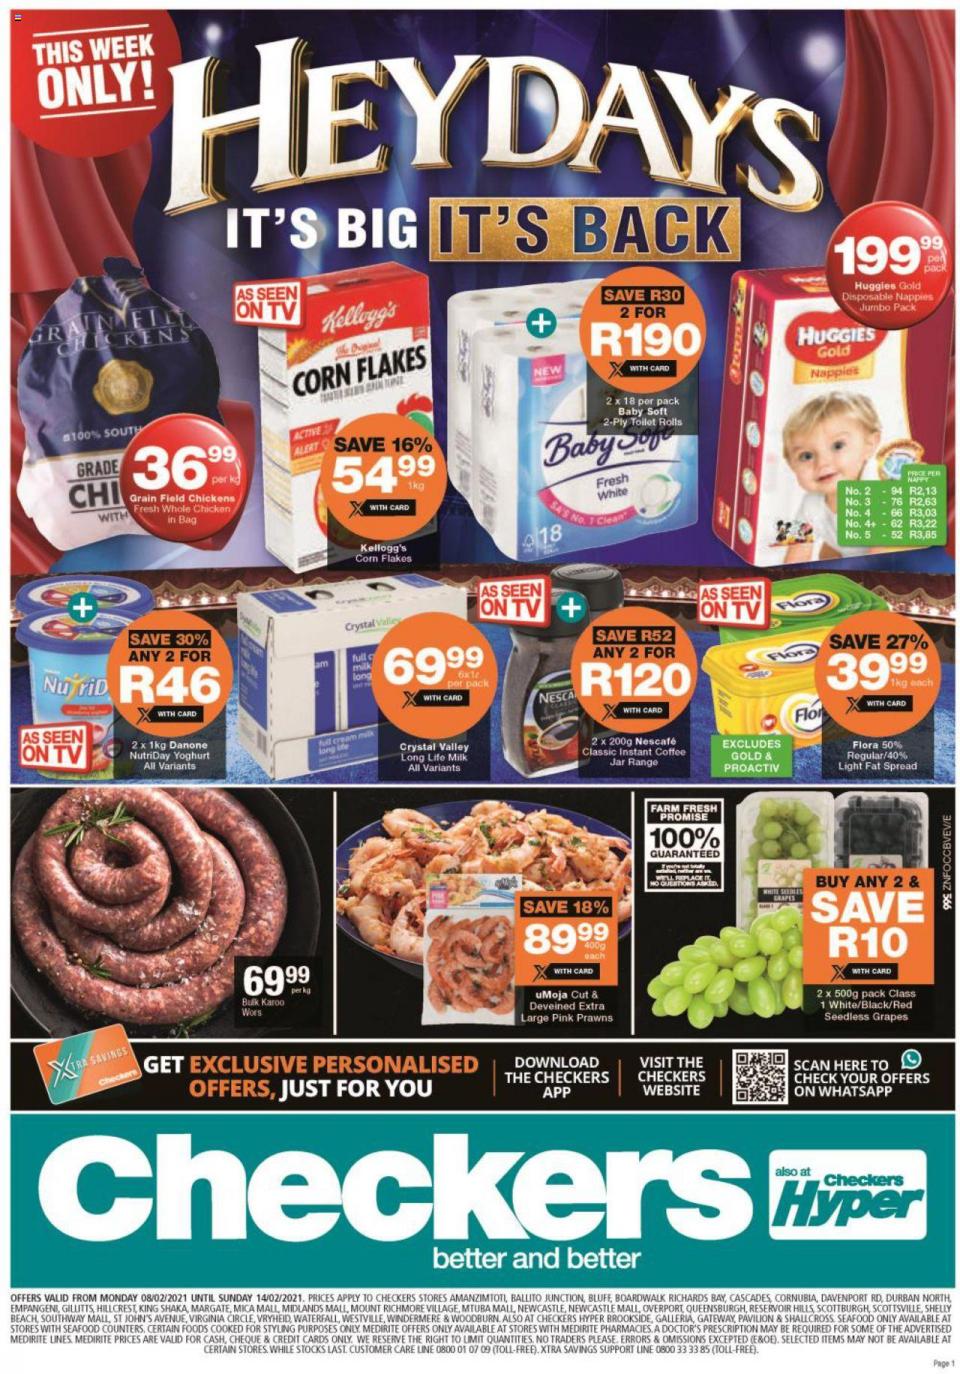 Checkers Specials Heydays Promotion 8 February 2021